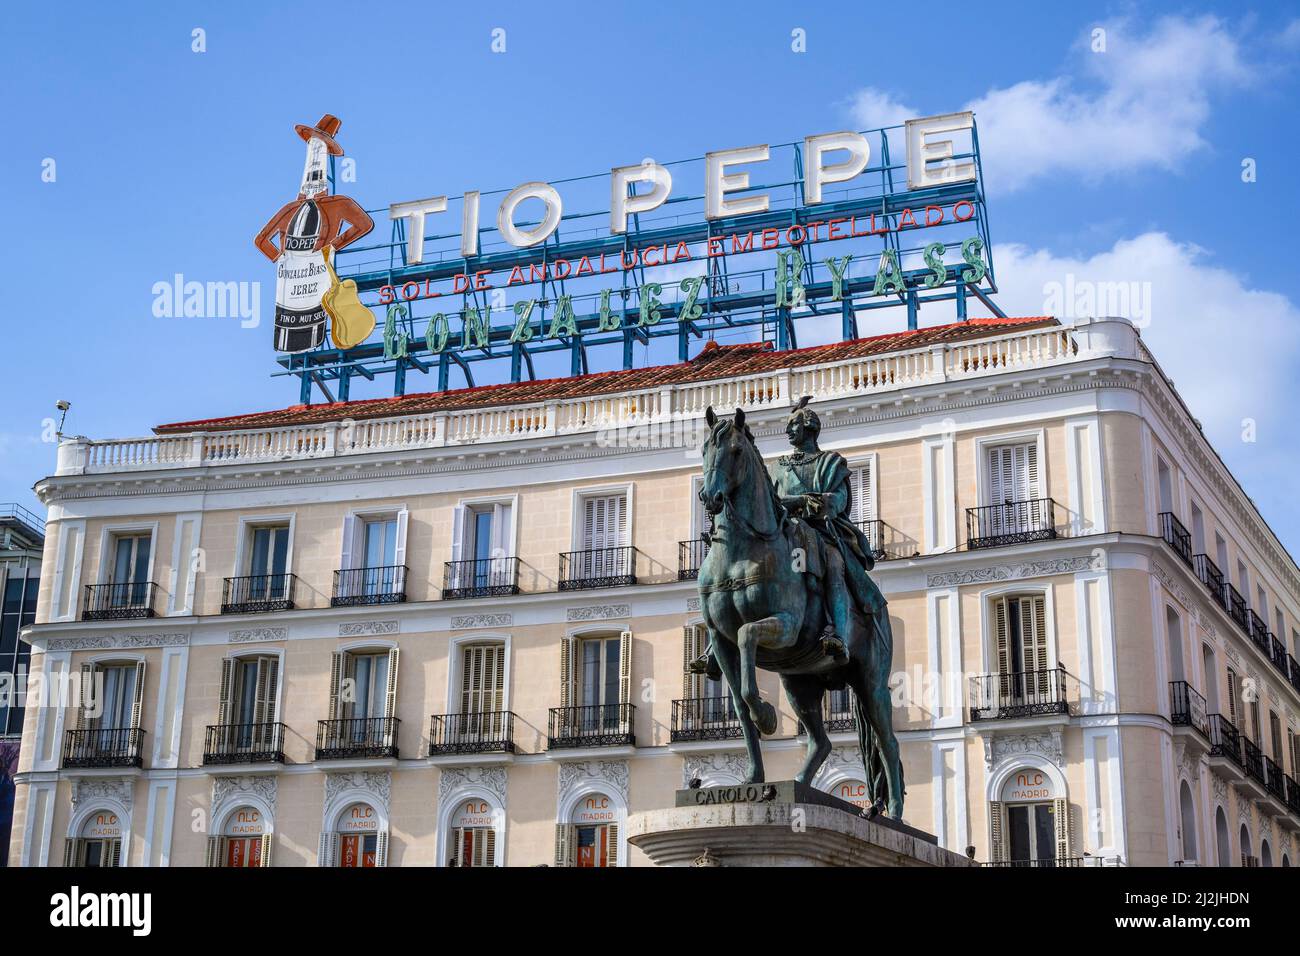 Carlos III statue and Tio Pepe neon sign in Madrid Centro, Spain. Stock Photo